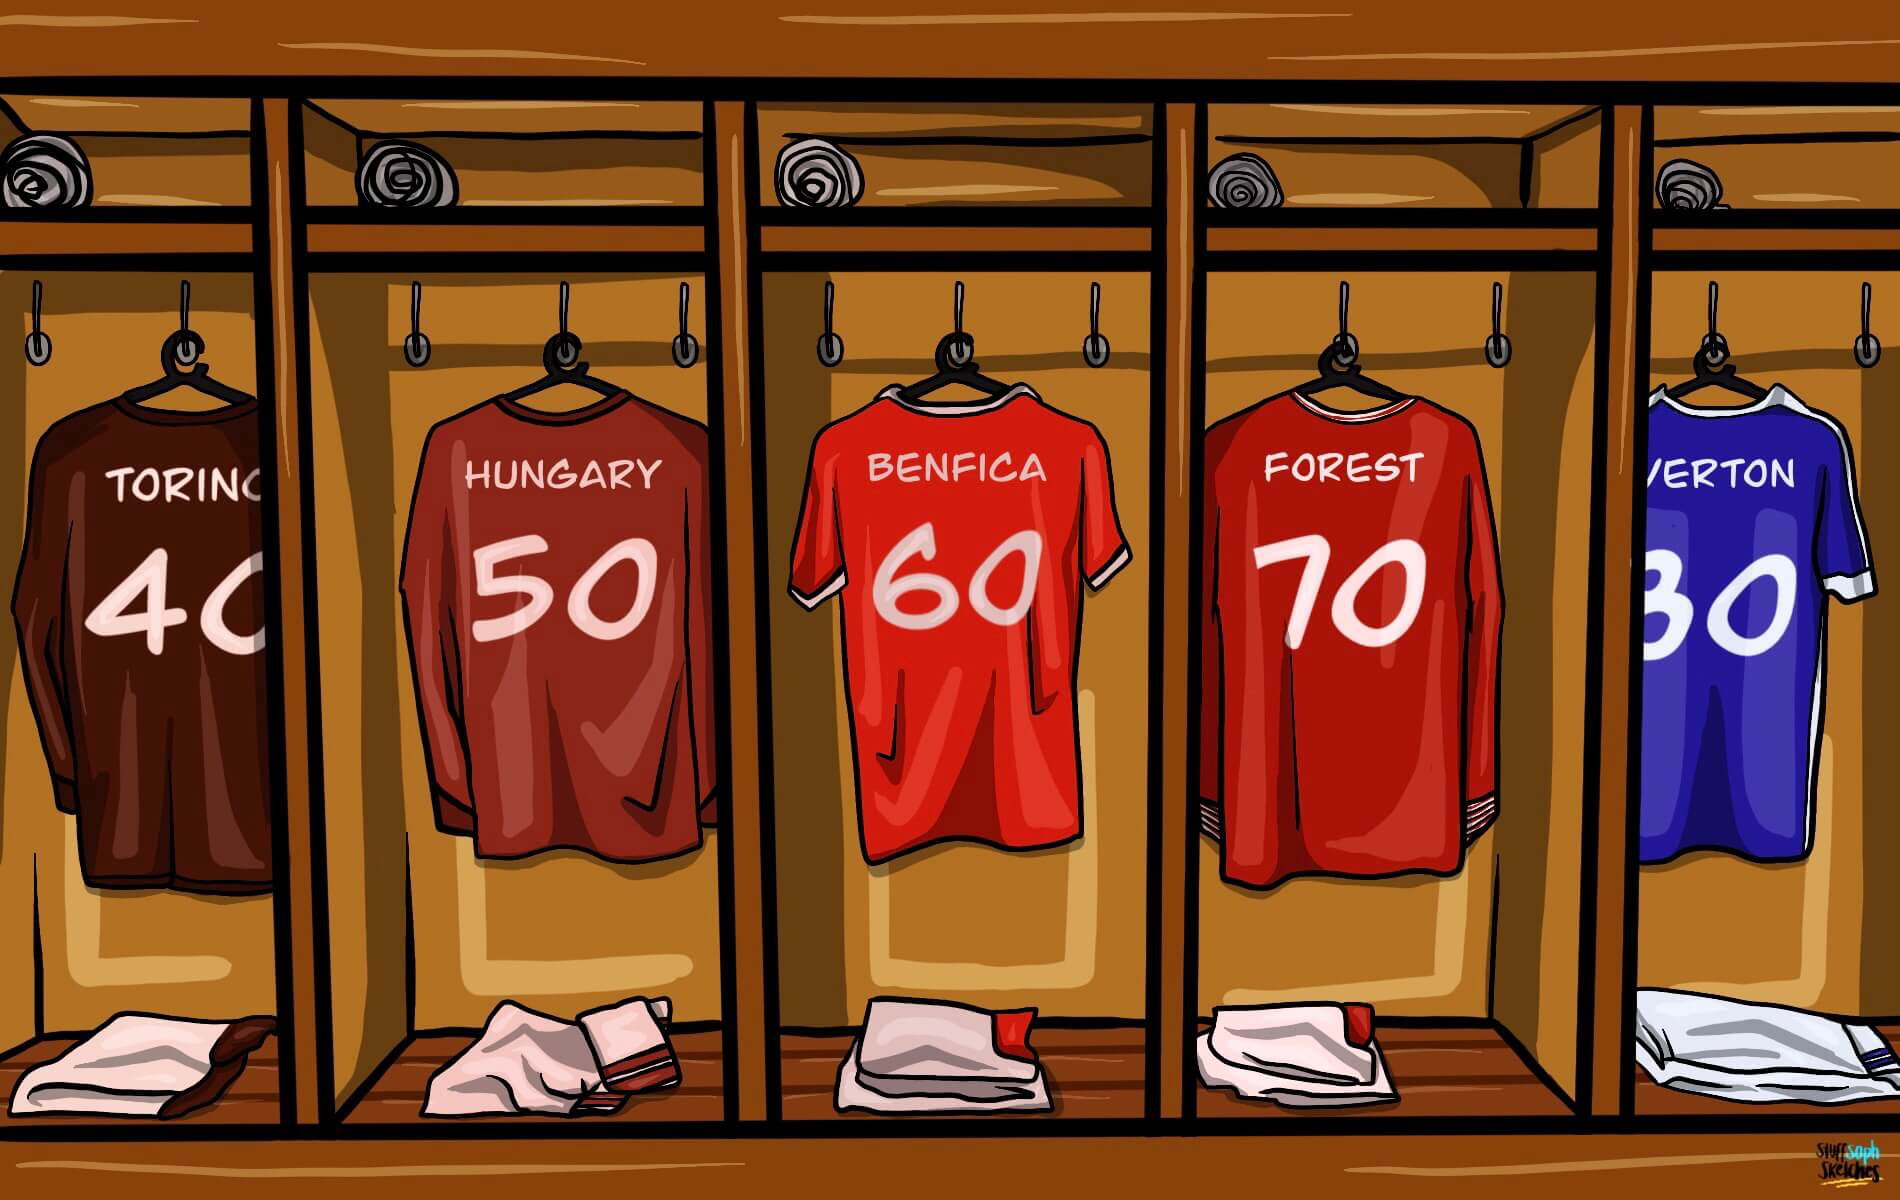 Five football shirts of different teams, hanging in a changing room